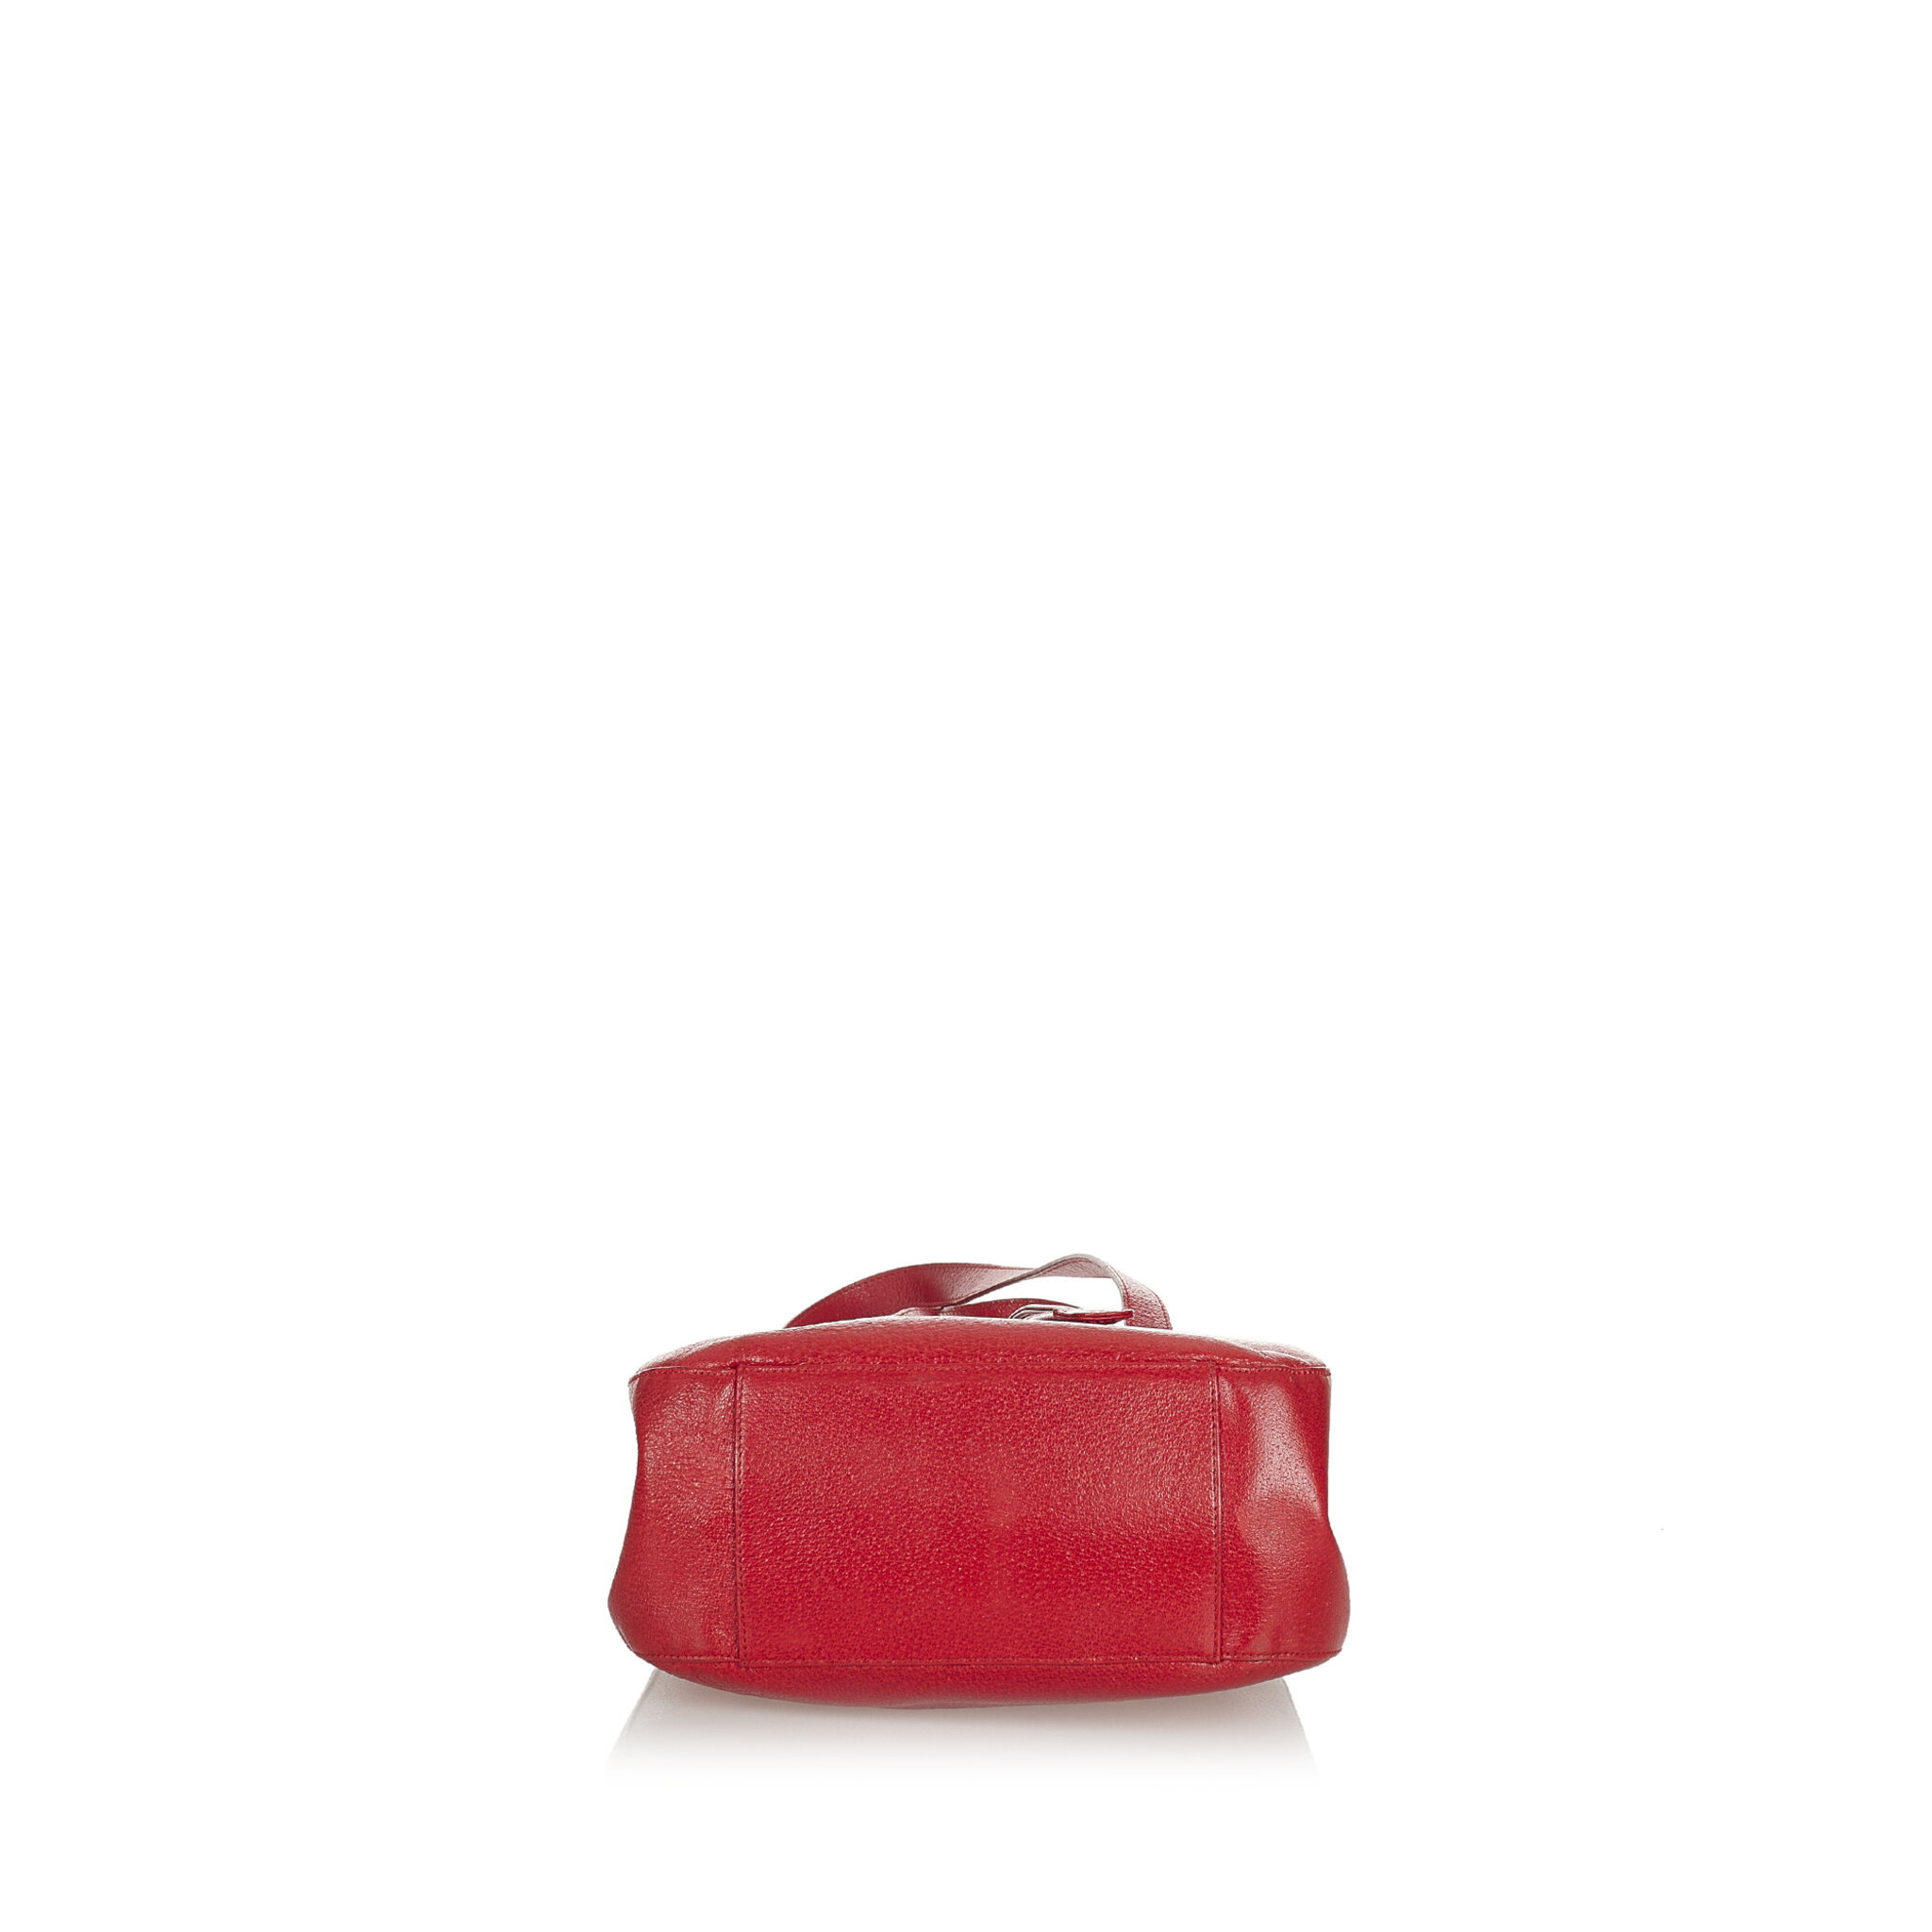 Gucci Leather Bucket Bag, ONESIZE, red